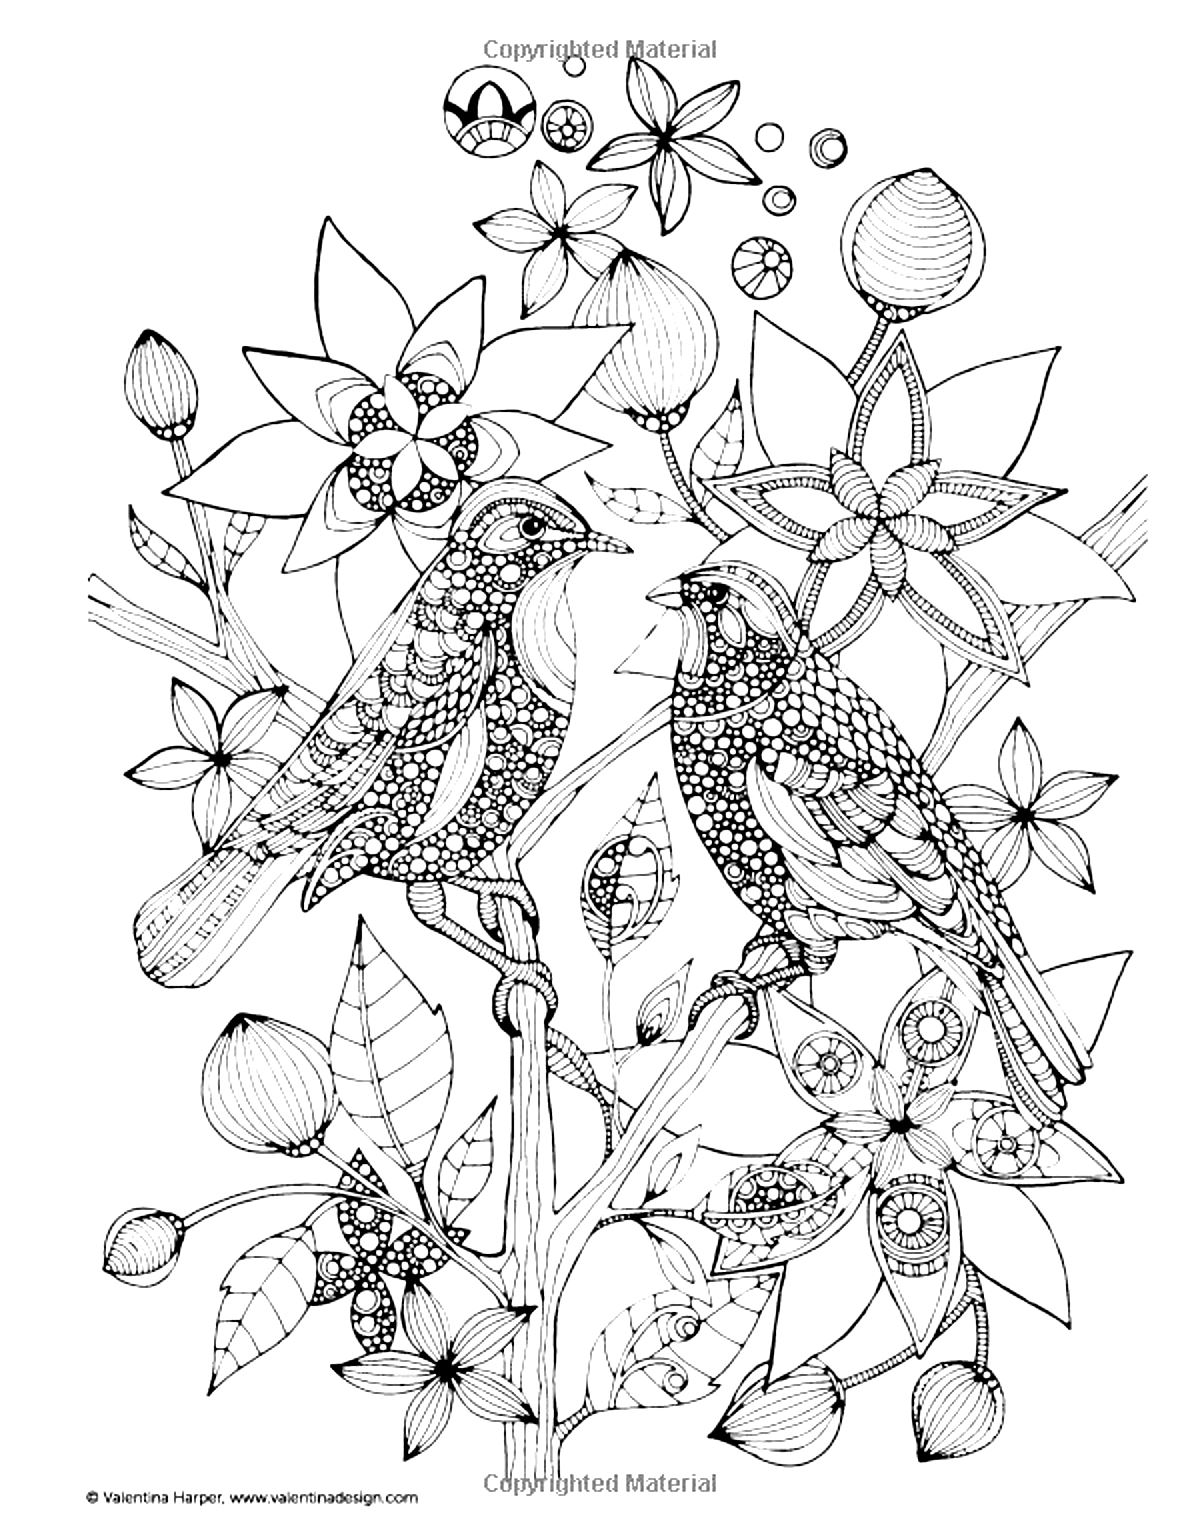 Two birds - Birds Adult Coloring Pages